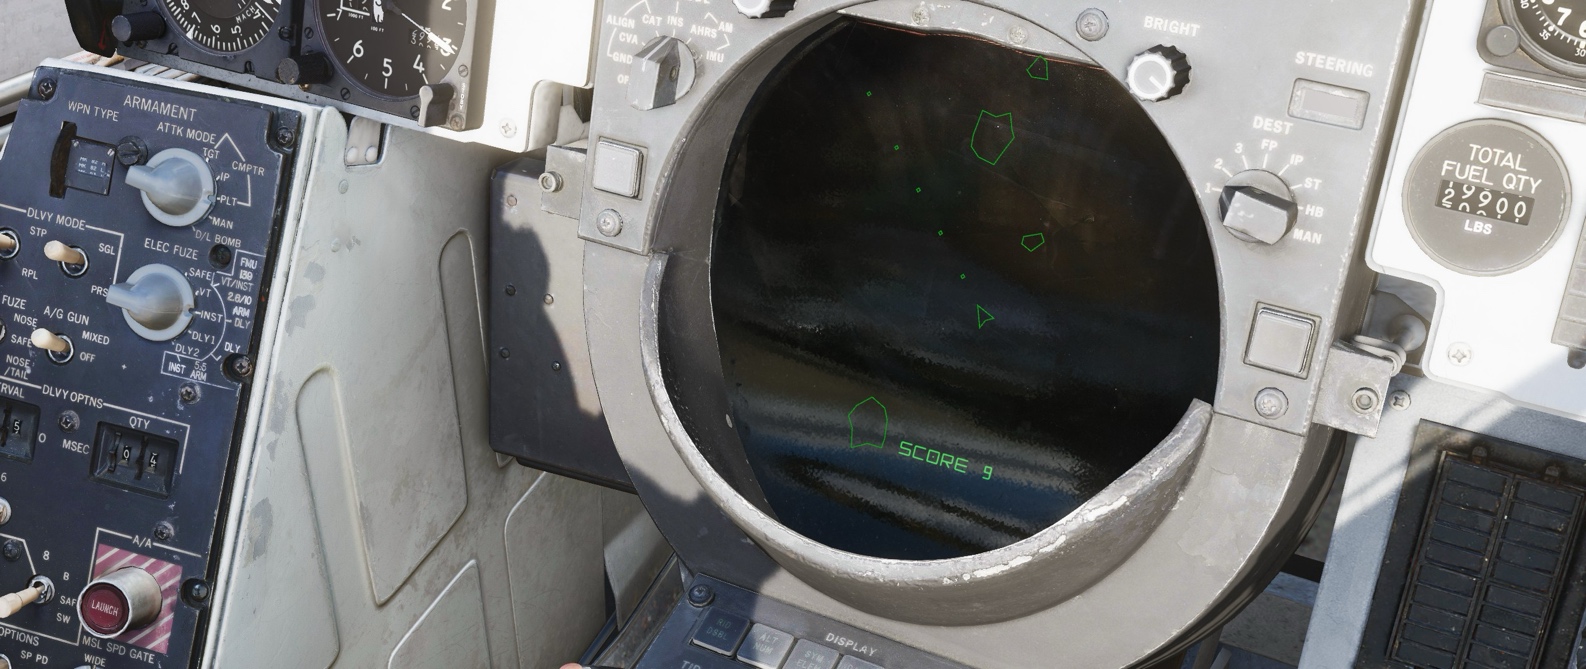 Classic Asteroids on the radar screen in a serious simulator? This is only possible in Heatblur! - Experts in Realism, Household Name Synonymous With Quality - Conversation With Heatblur Team - dokument - 2024-03-11